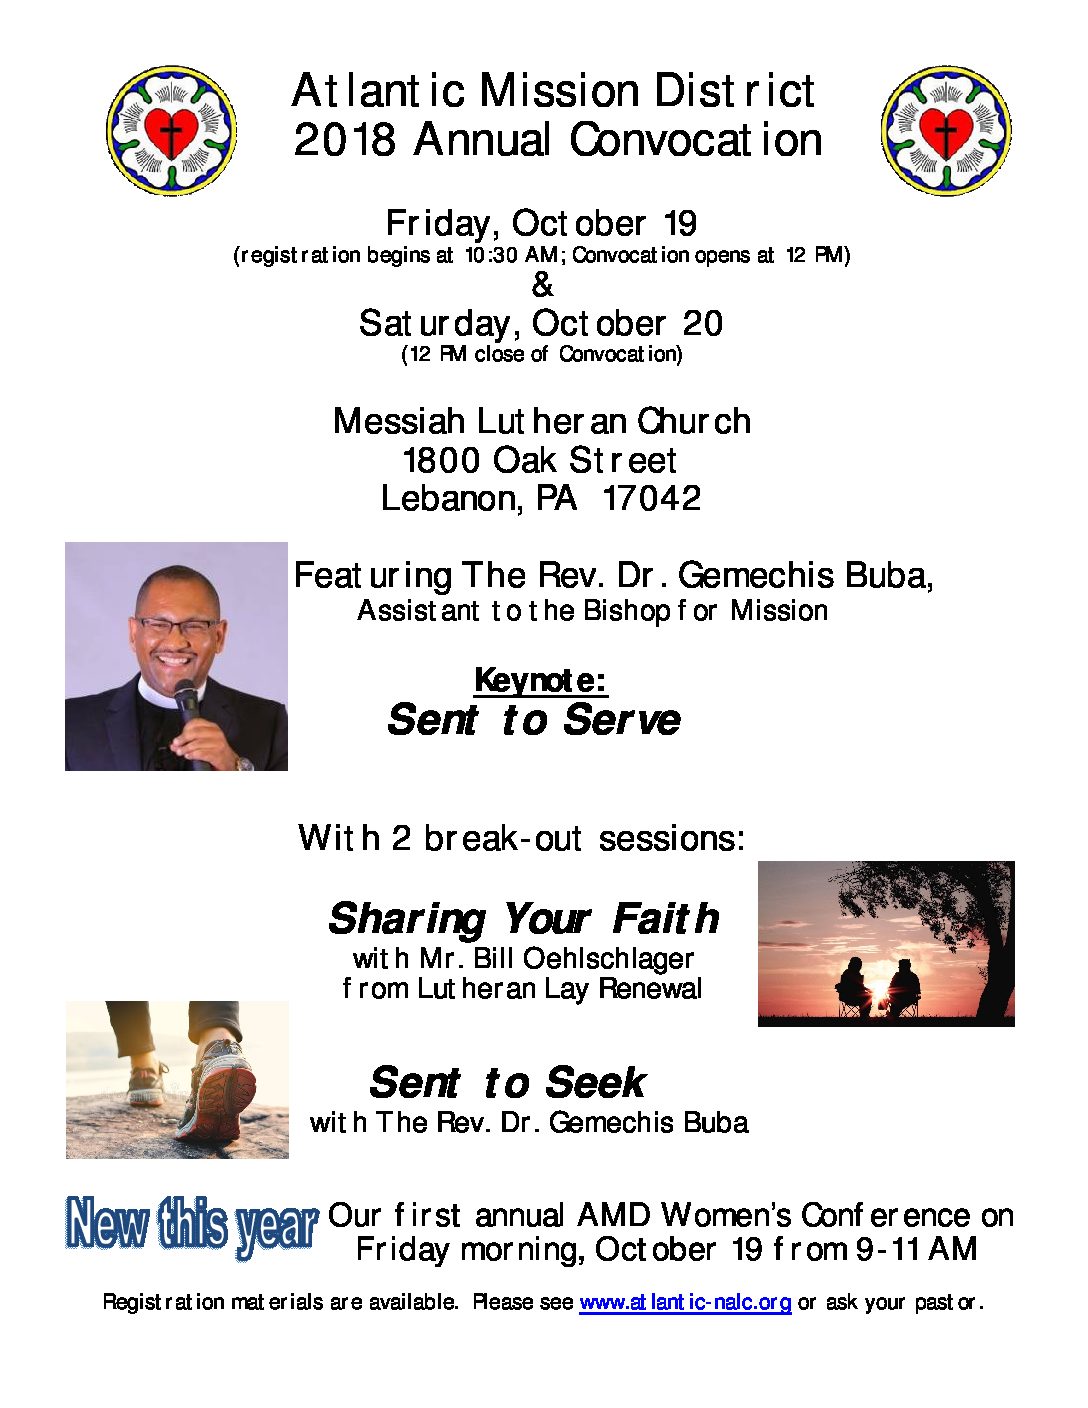 Convo flyer 18 for reg pack | Atlantic Mission Region of the NALC